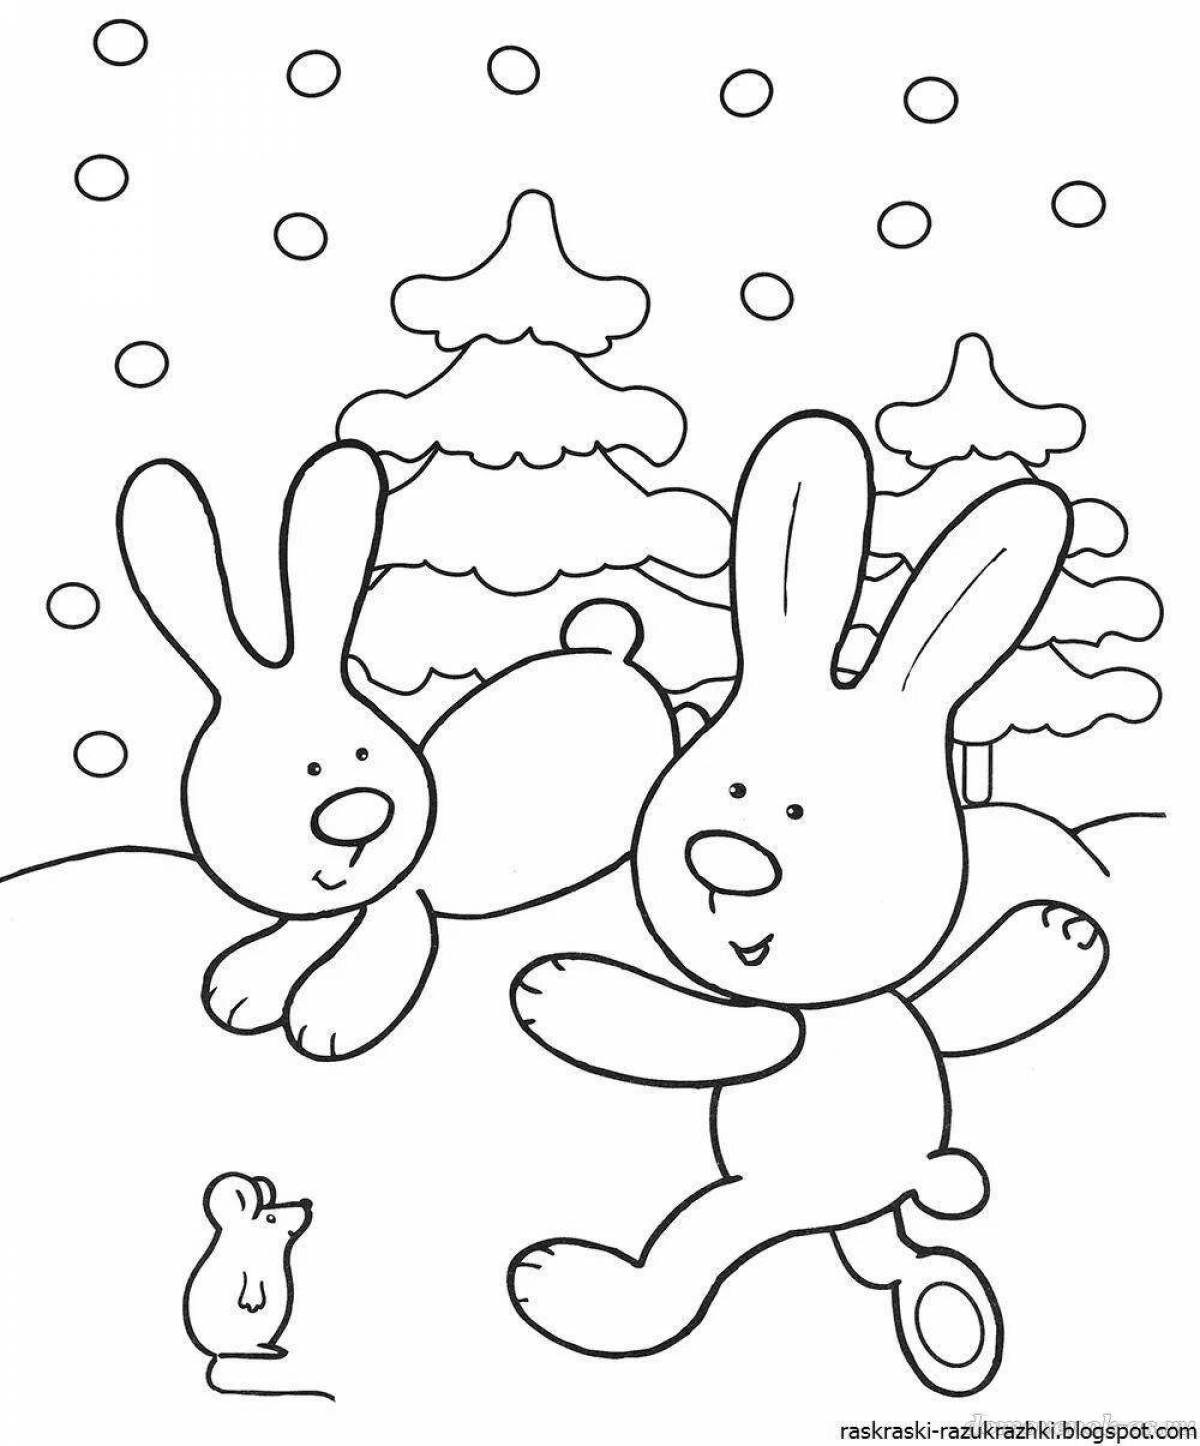 Radiant hare coloring book for children 2-3 years old